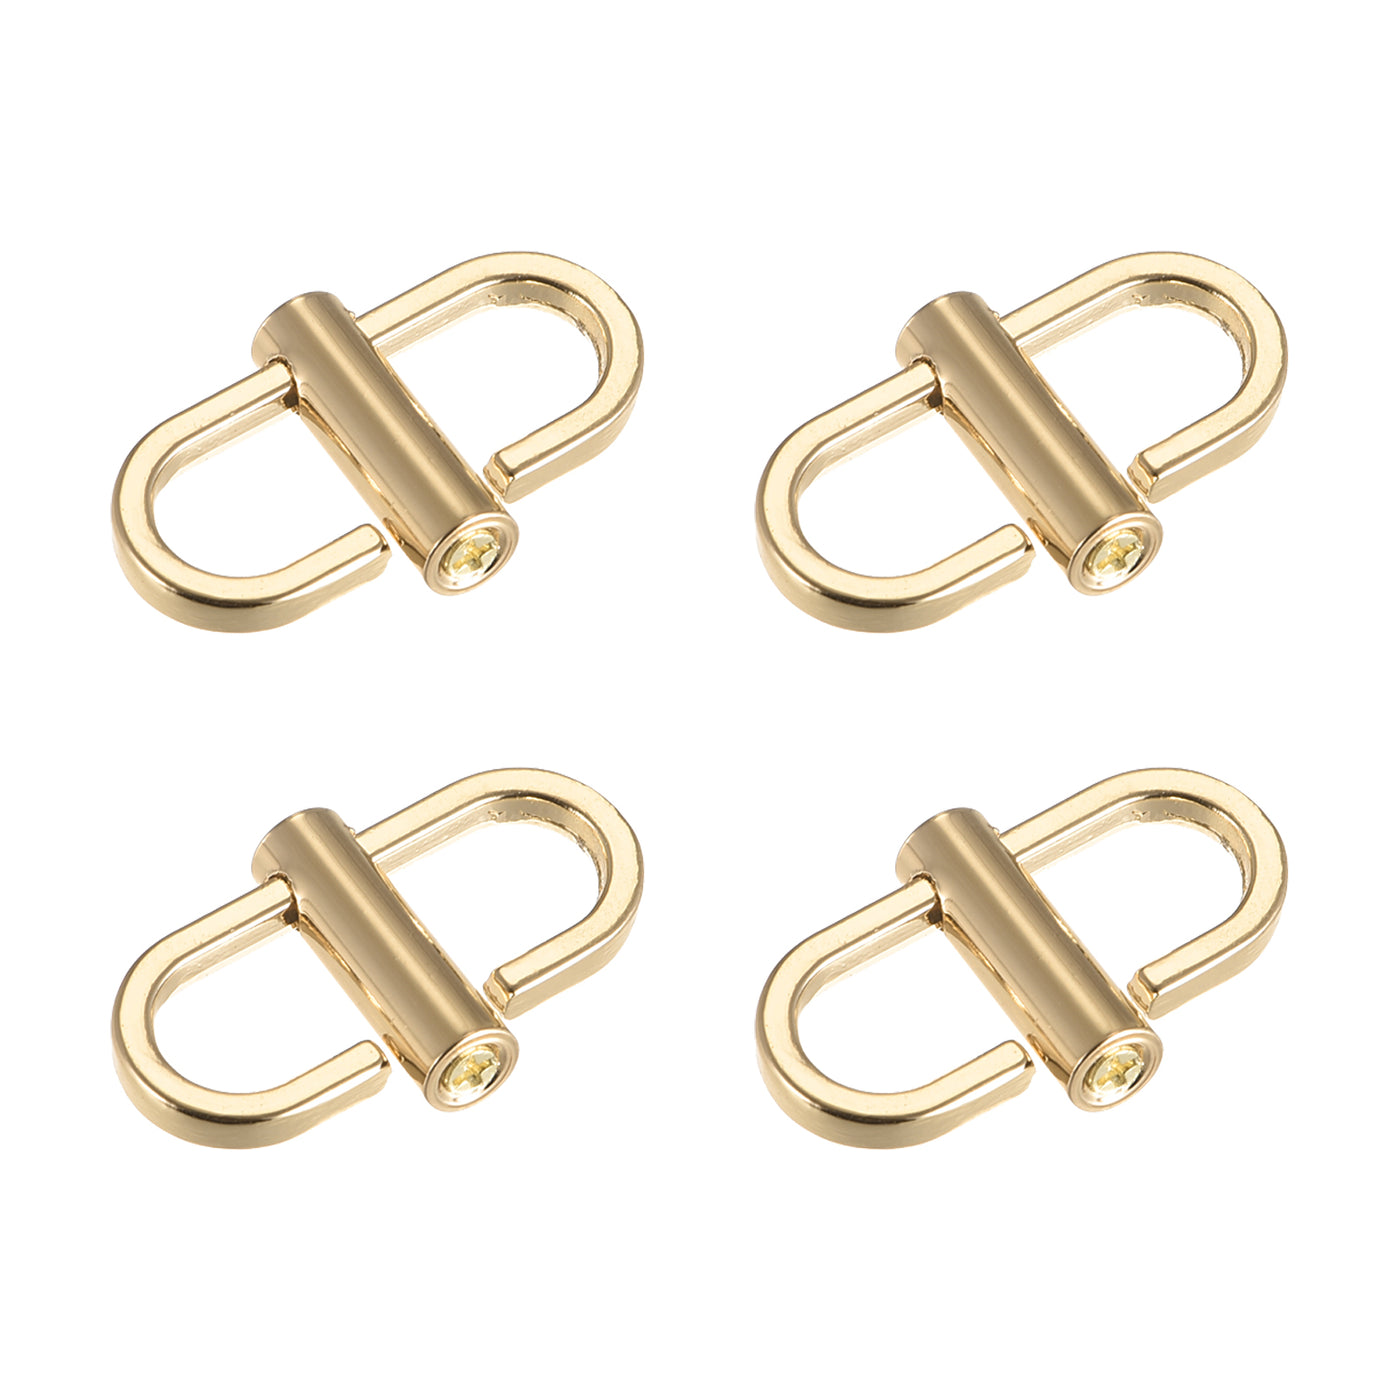 Uxcell Uxcell Adjustable Metal Buckles for Chain Strap, 4Pcs 22x13mm Chain Shortener, Yellow